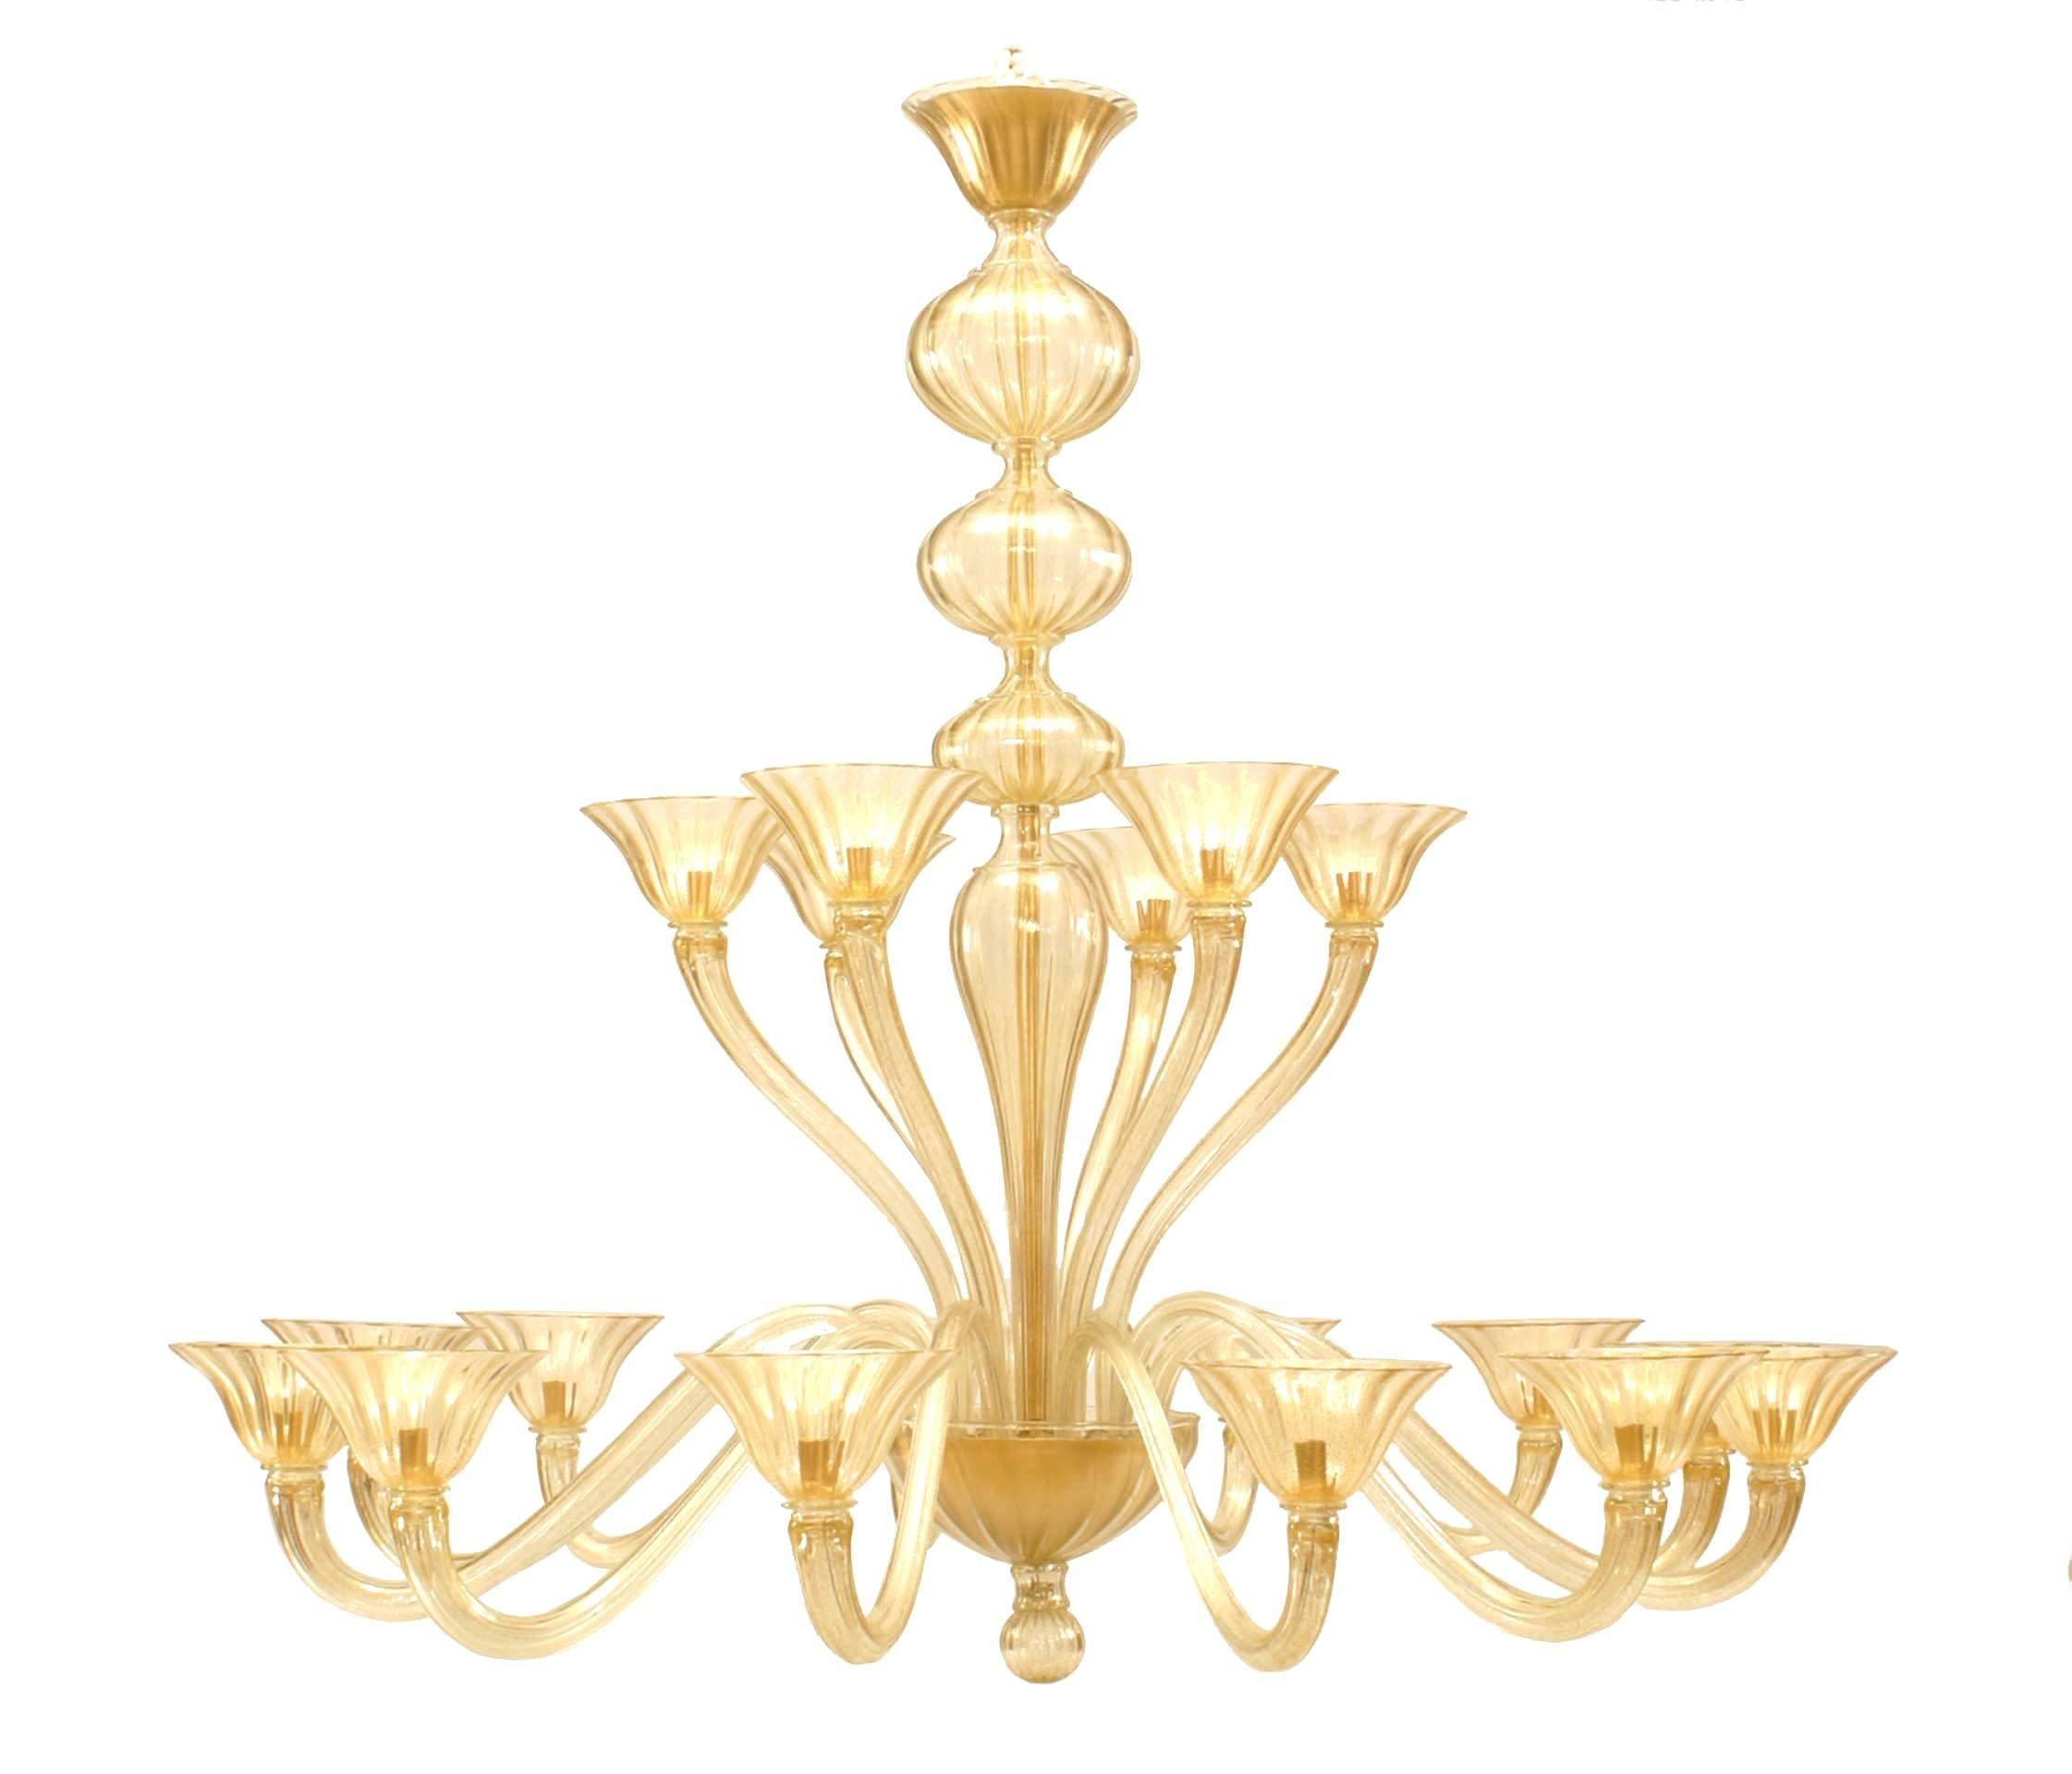 1950's style chandelier by Seguso composed of fluted gold dusted glass with eighteen s-shaped arms holding cup shades, divided between two tiers, one with six arms and the other with twelve.